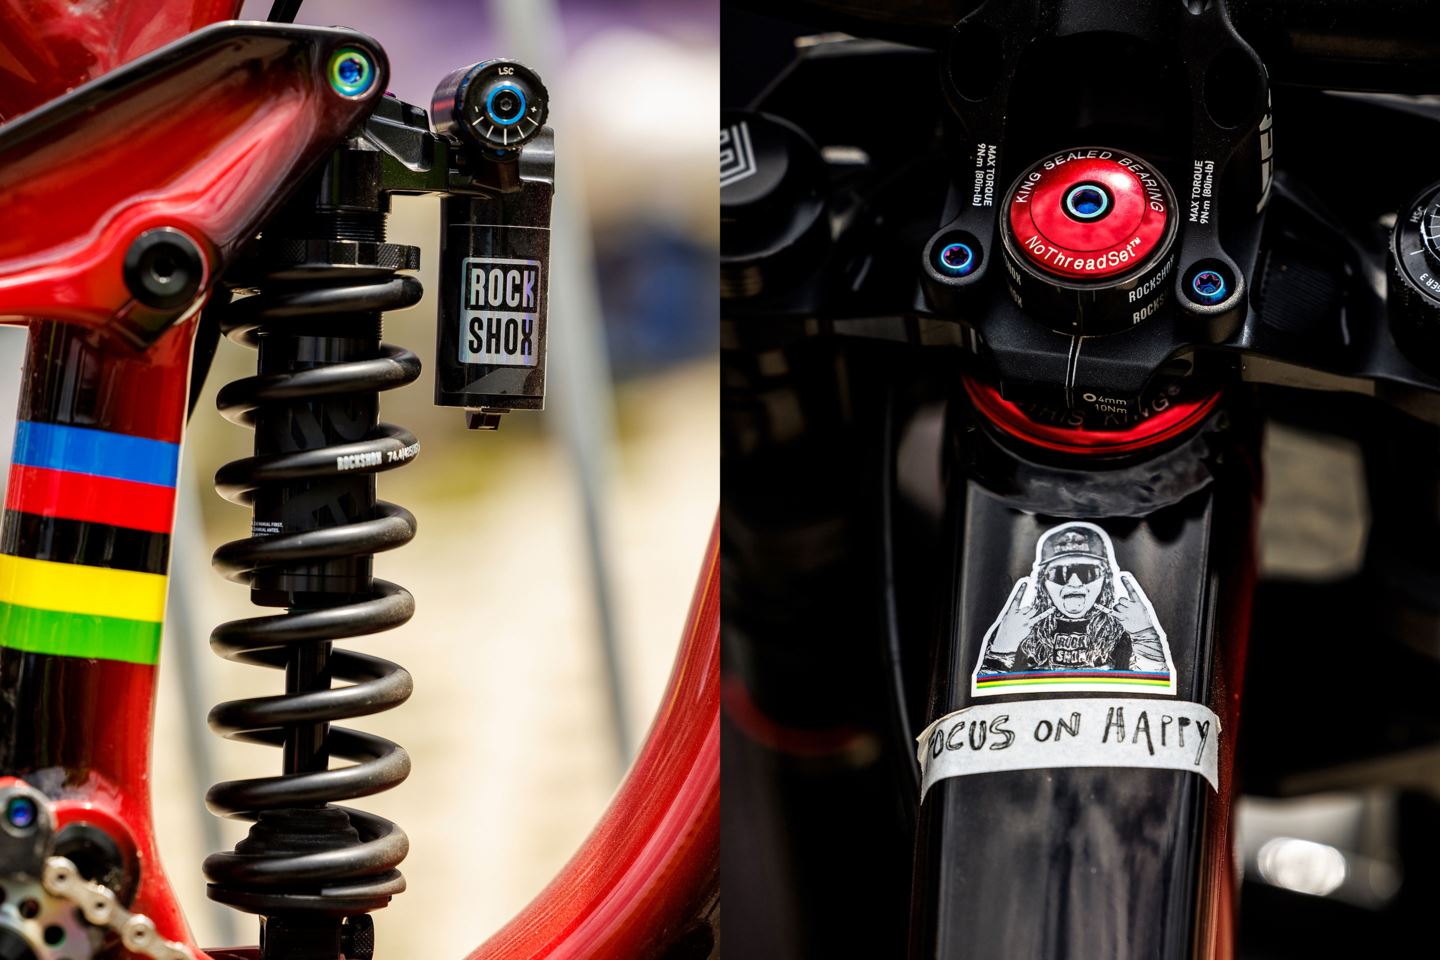 (Left) A close-up of a Super Deluxe Coil on Vali's bike. (Right) A top down shot of Vali's "Focus on Happy" sticker.